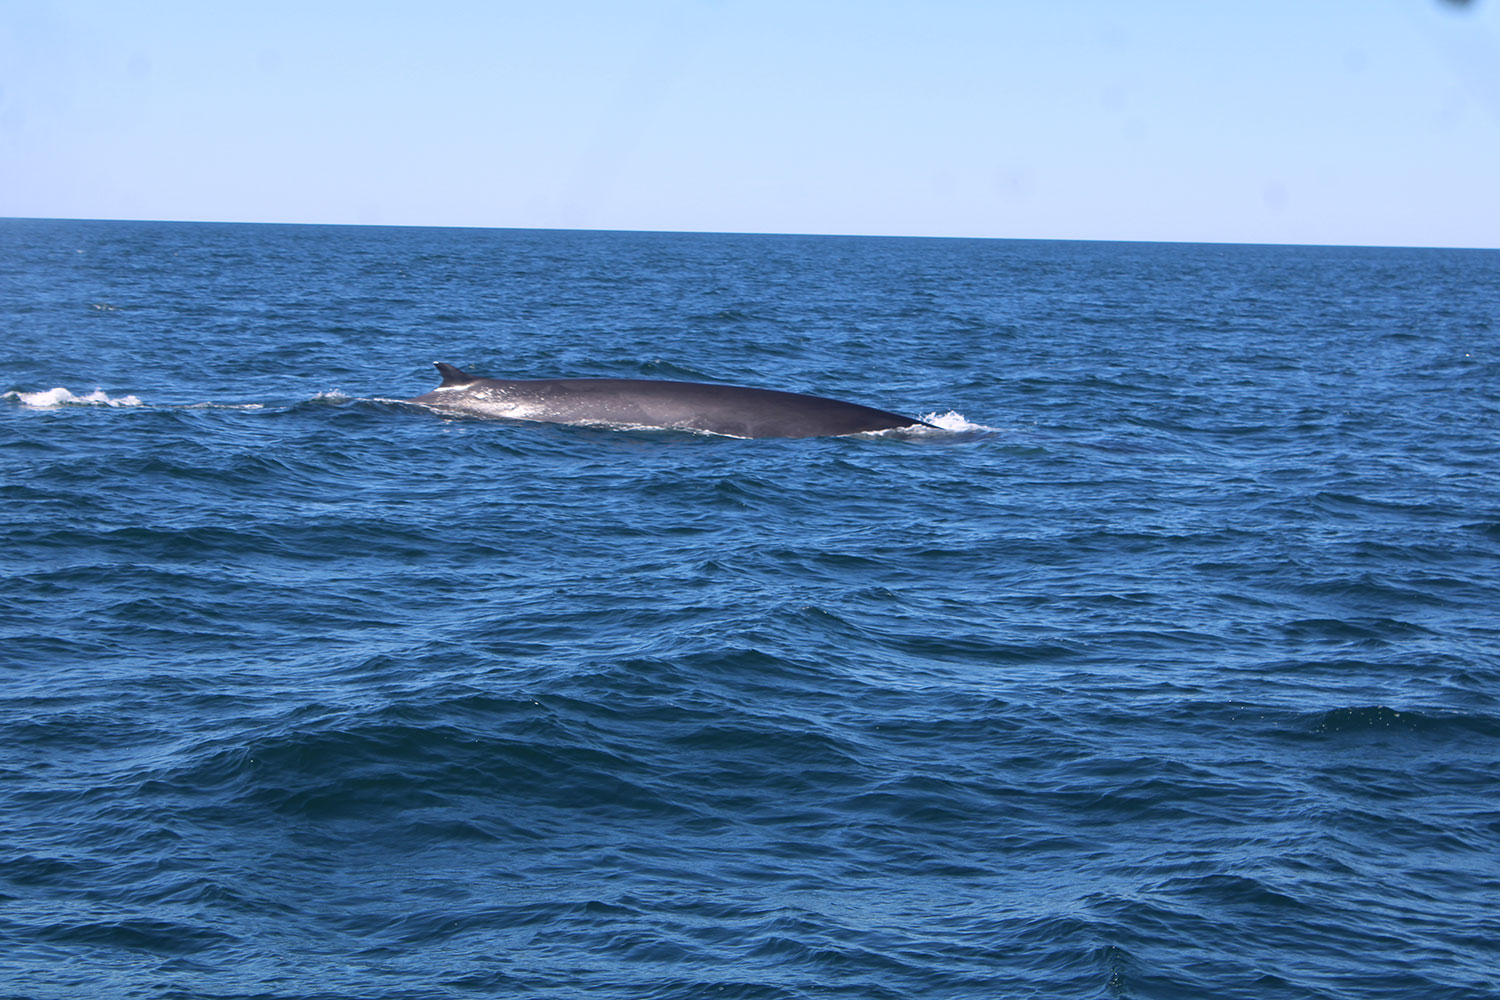 Whale Watching in Provincetown, MA